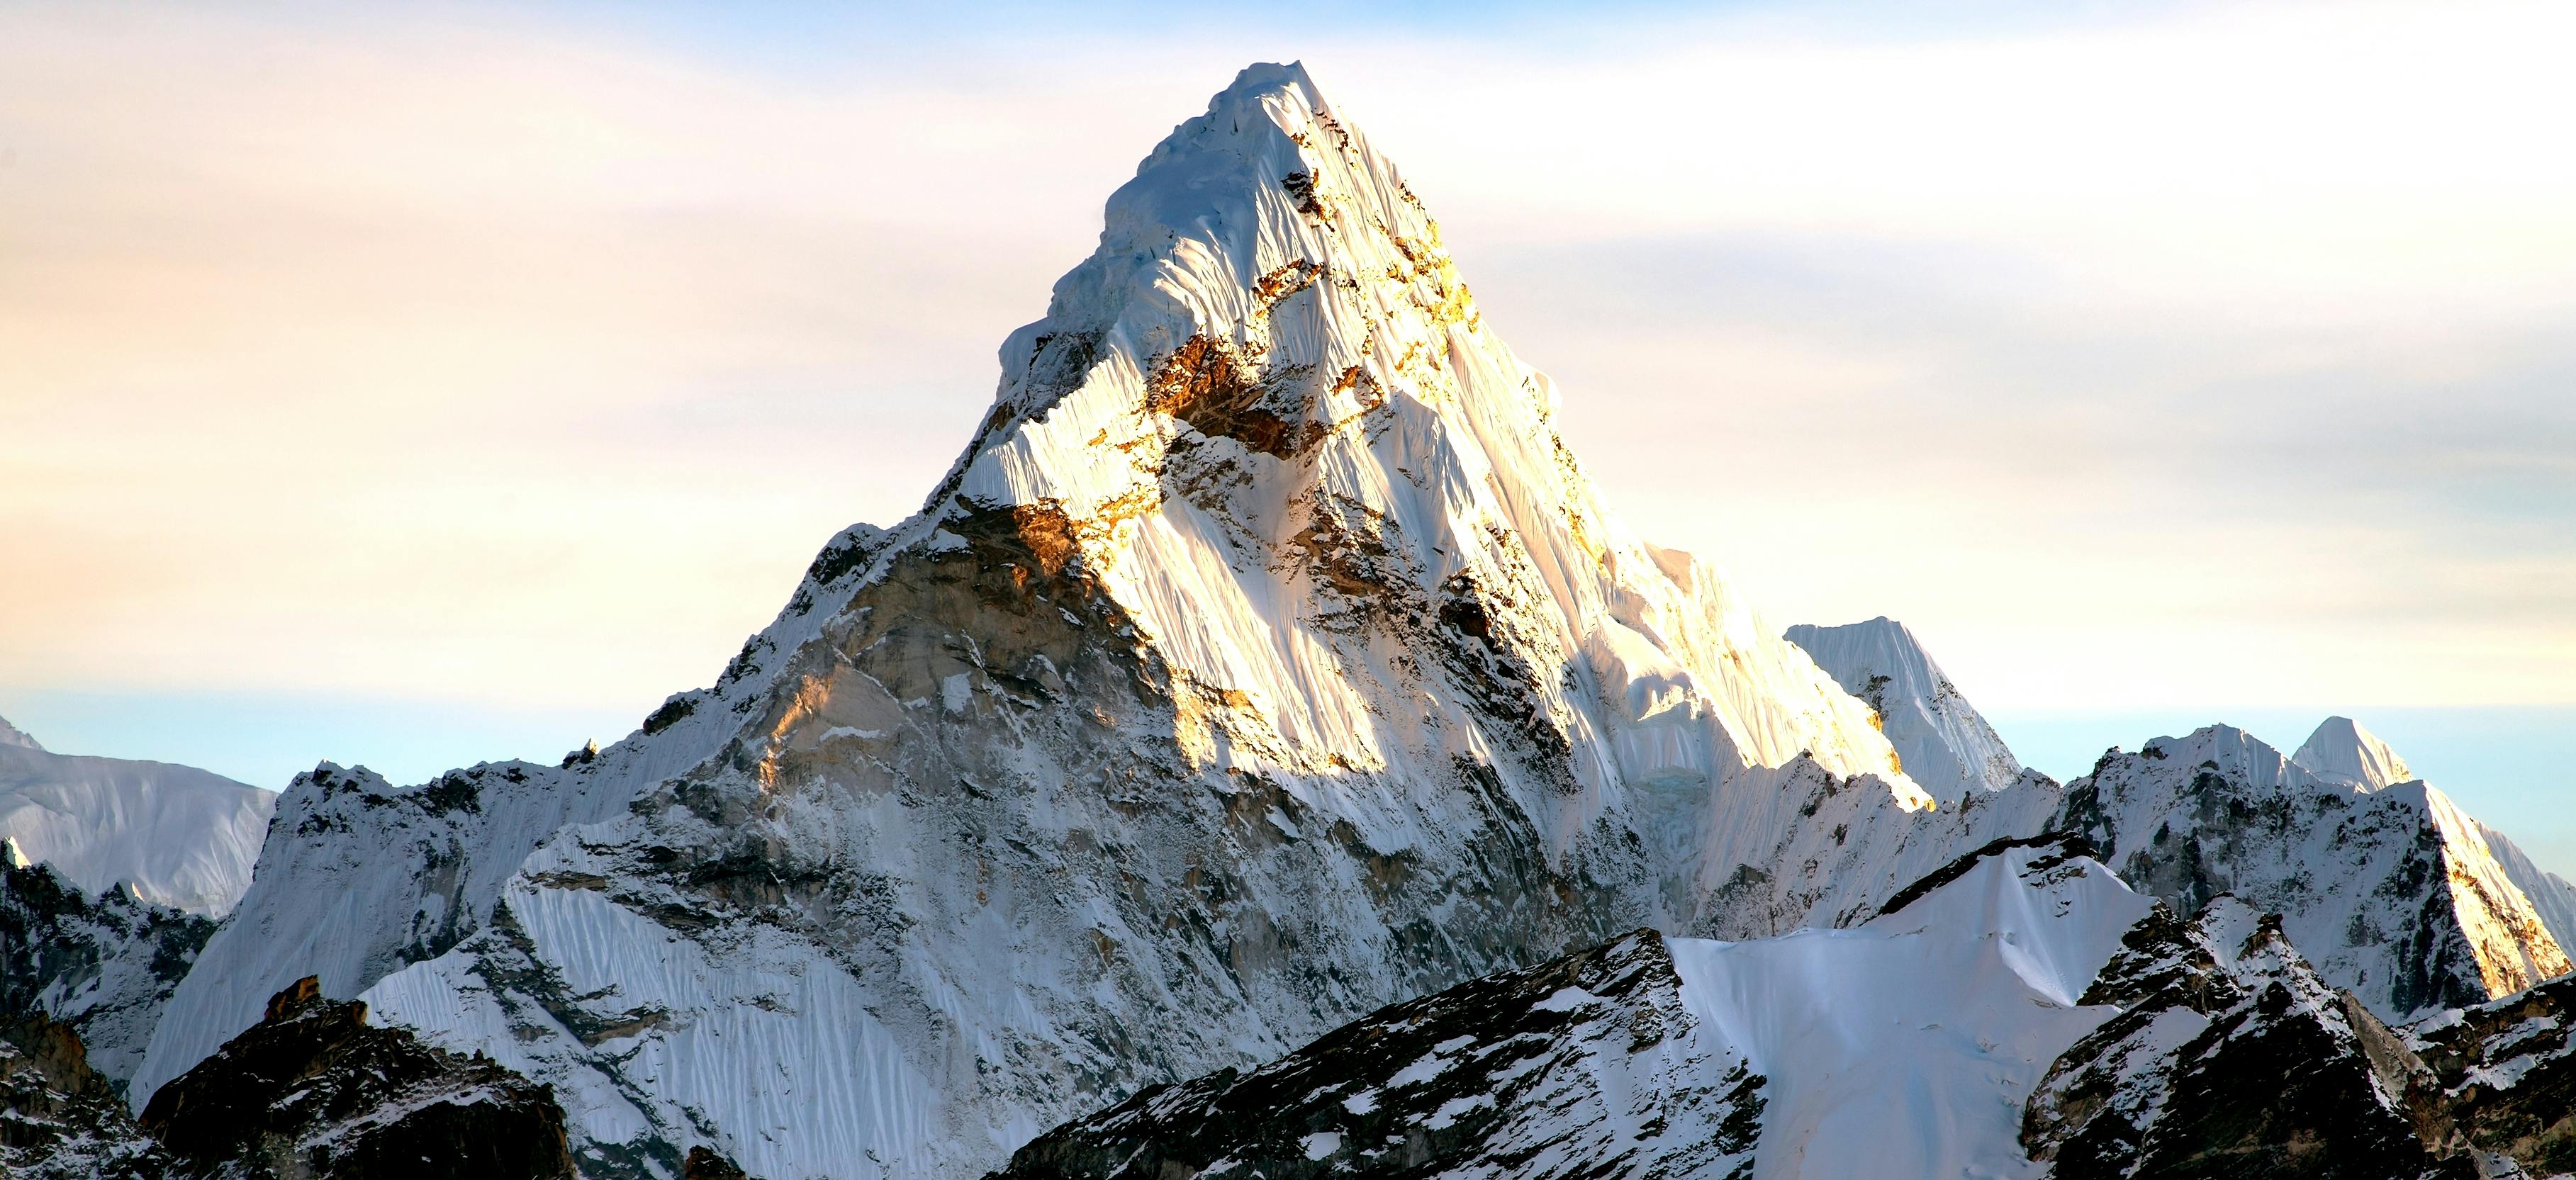 How Can We See Everest?